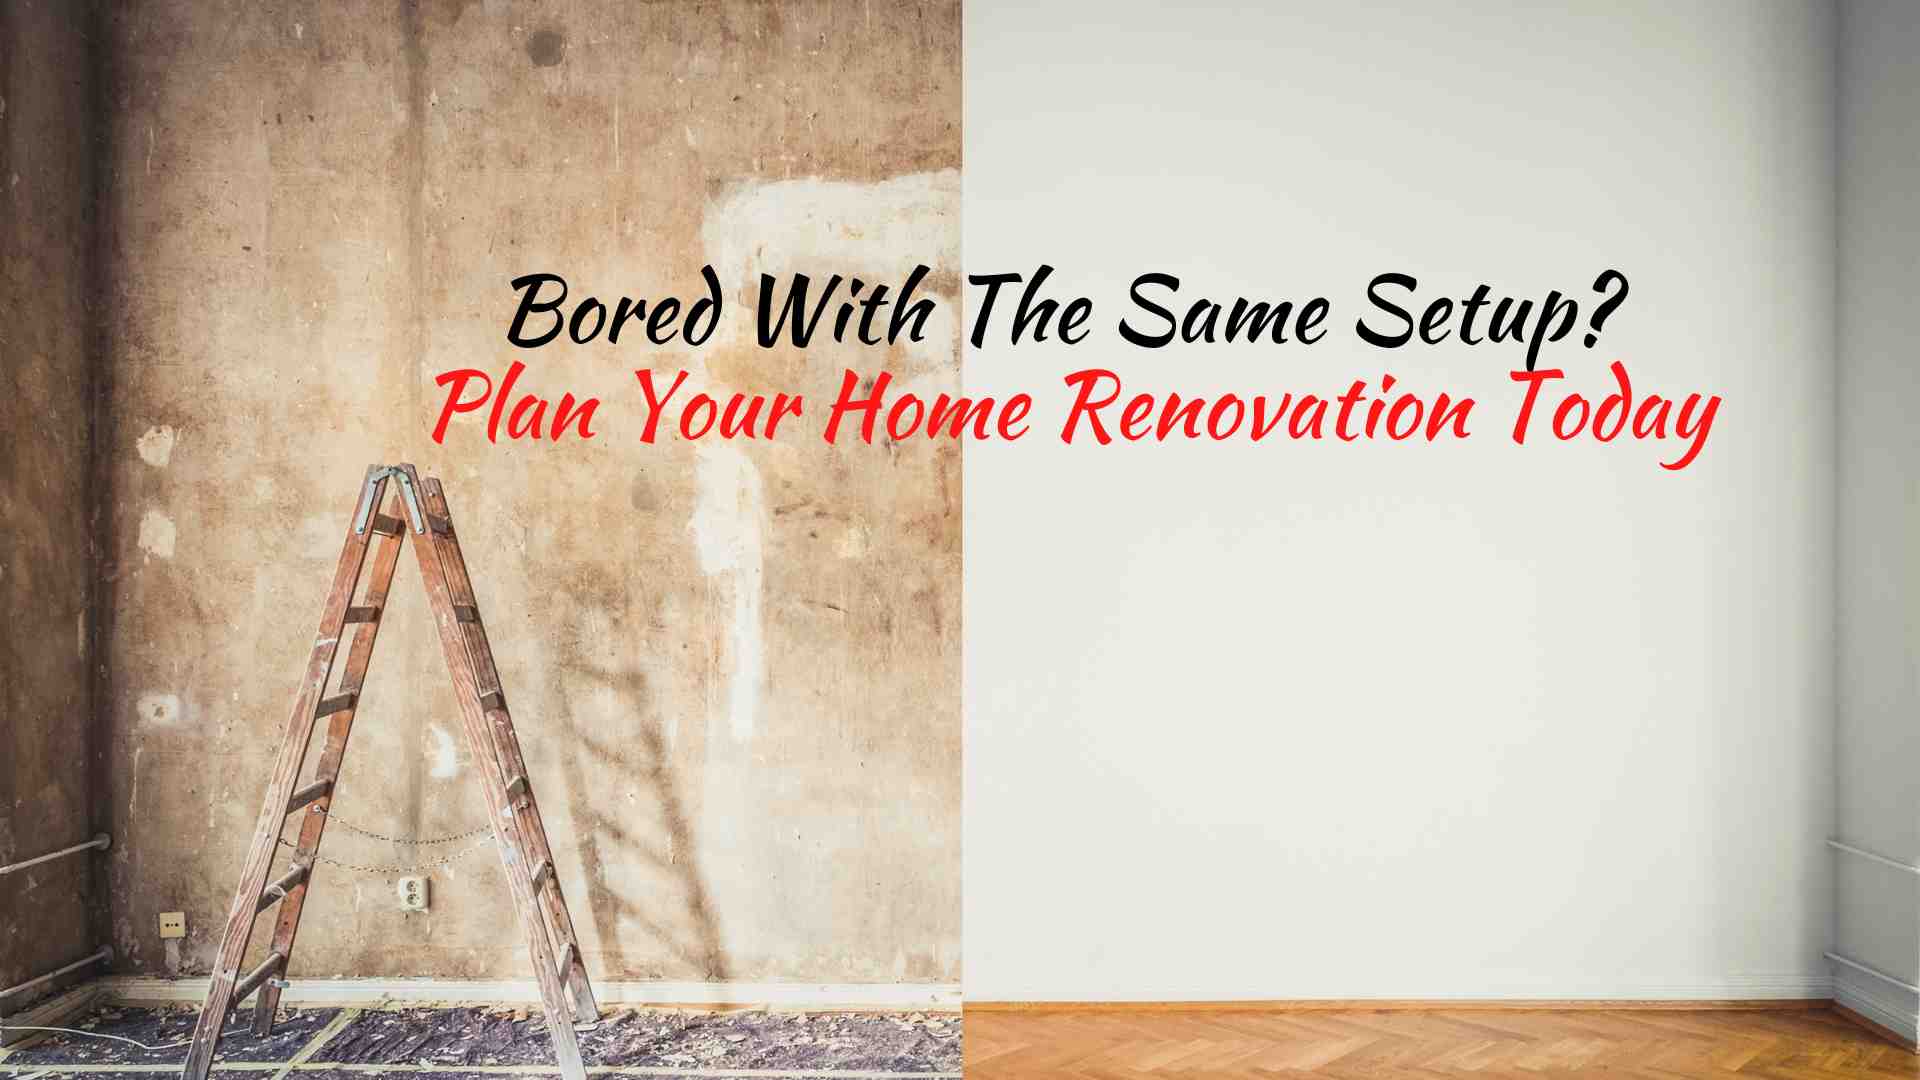 Plan Your Home Renovation Today